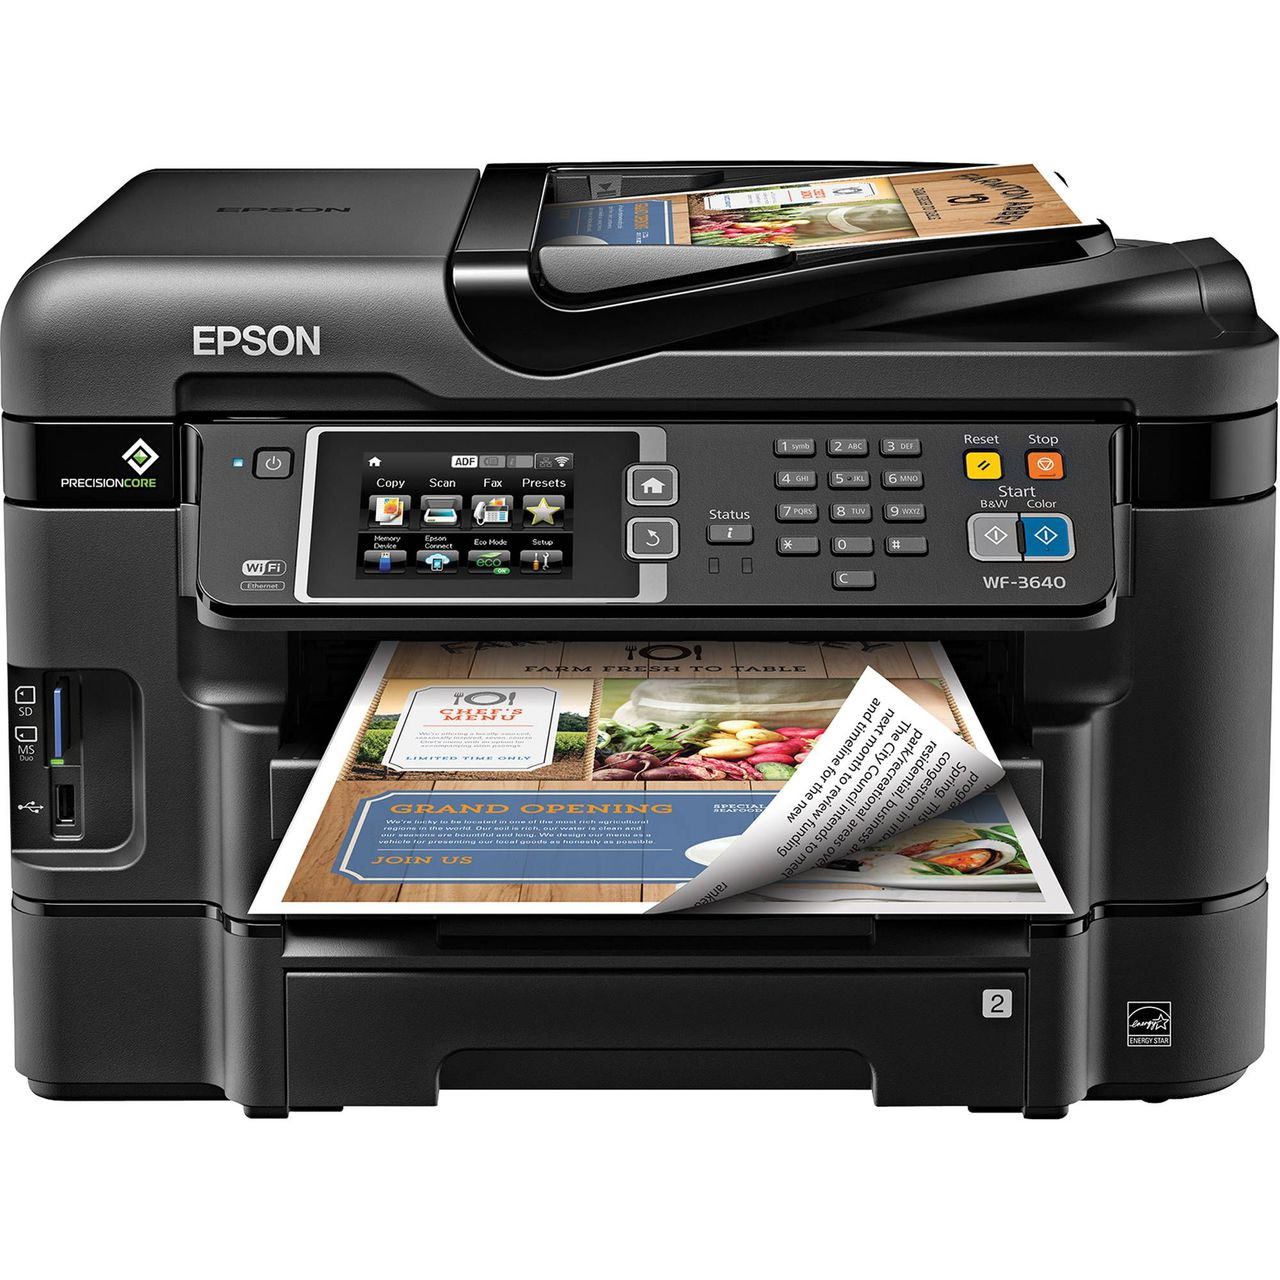 Epson Workforce Wf 2650 All In One Wireless Color Printer With Scanner Copier And Fax 6036